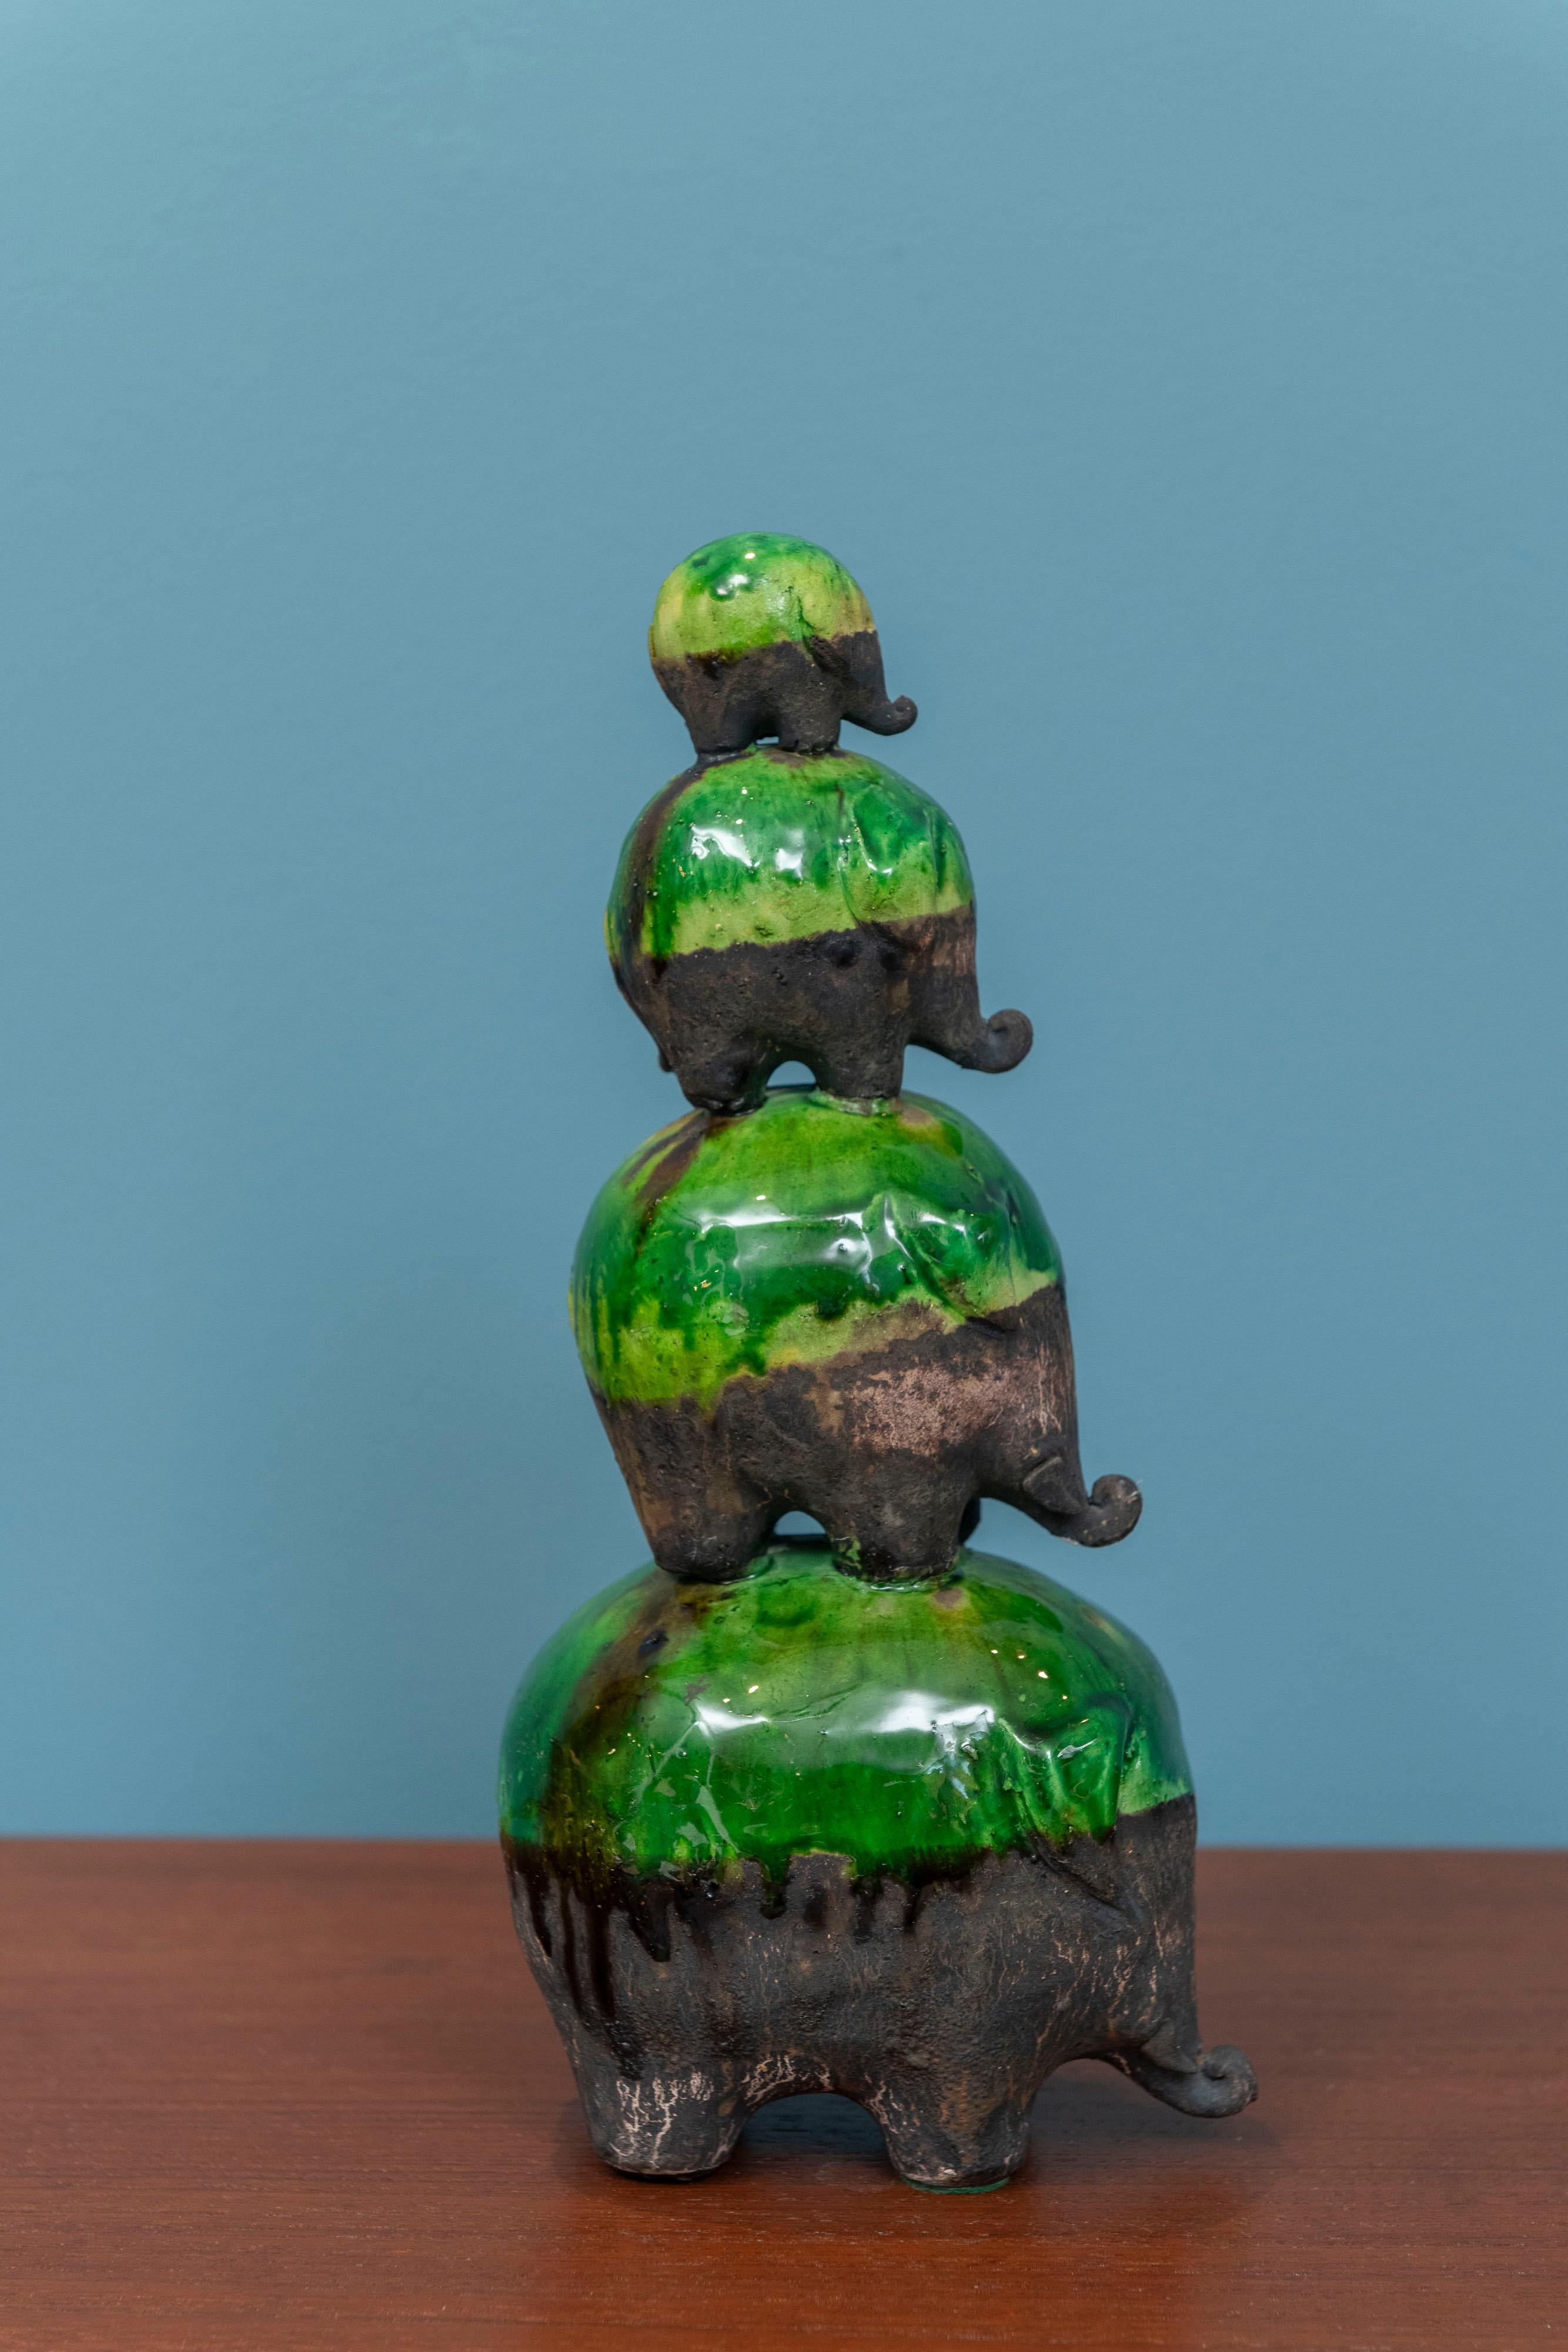 Ivo De Santis for Gil Etruschi, Italy. Polychromed ceramic family of elephants stacked on top of each other. Dad, Mom and two children playfully stacked in very good original condition. rare and collectible ceramic sculpture.